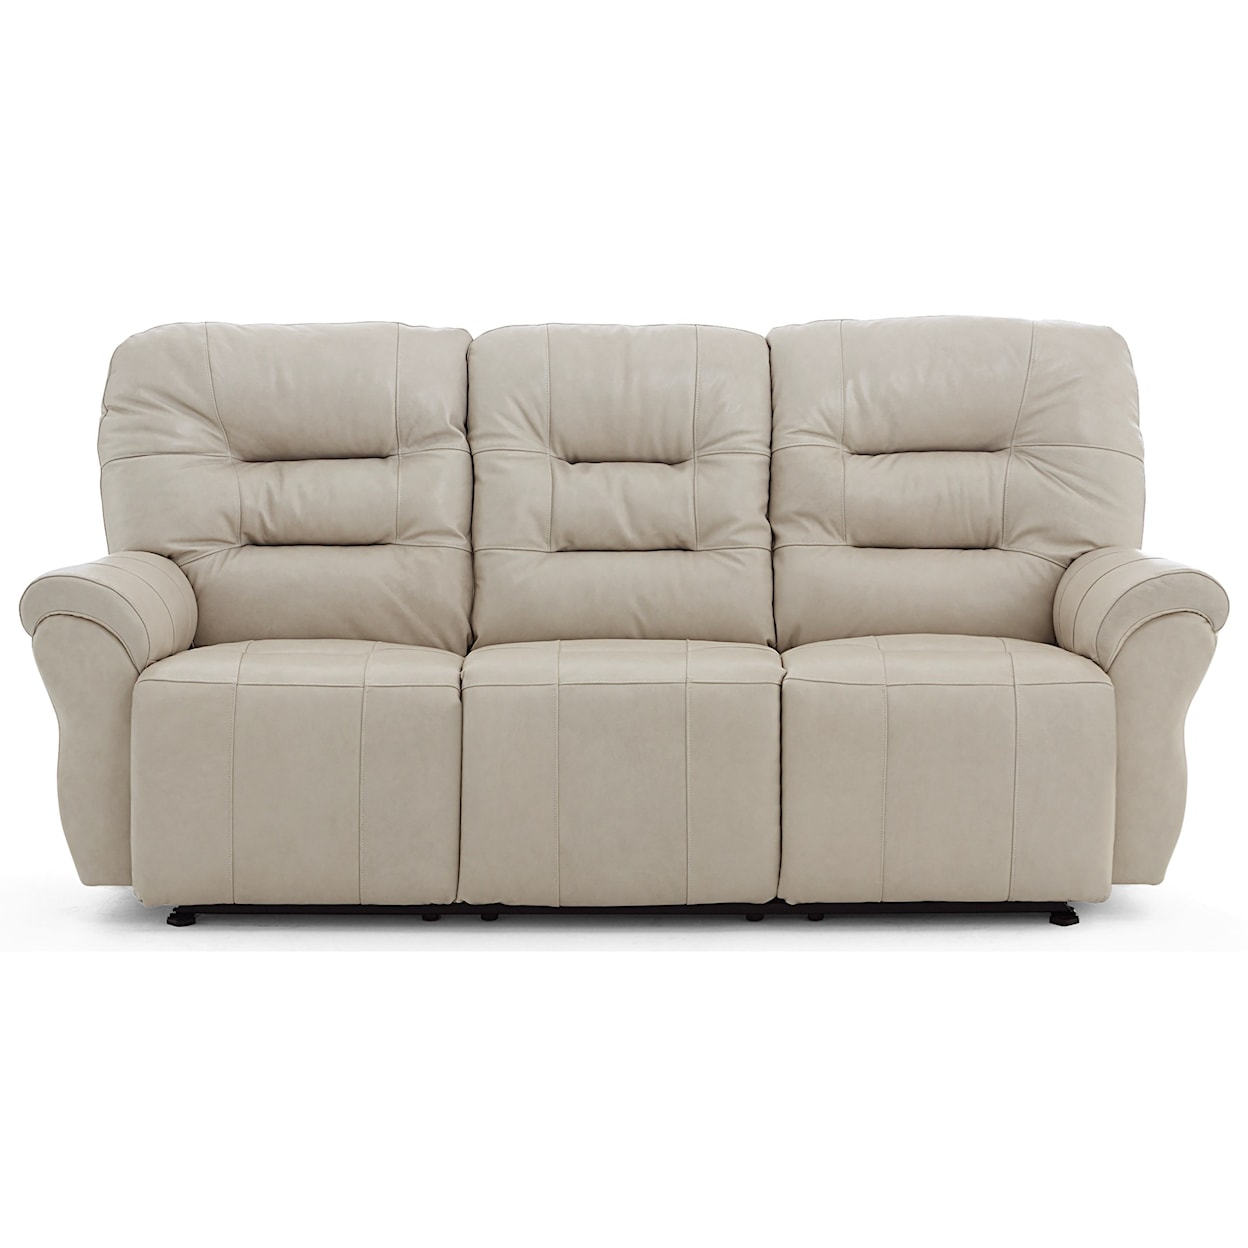 Best Home Furnishings Unity Space Saver Reclining Sofa